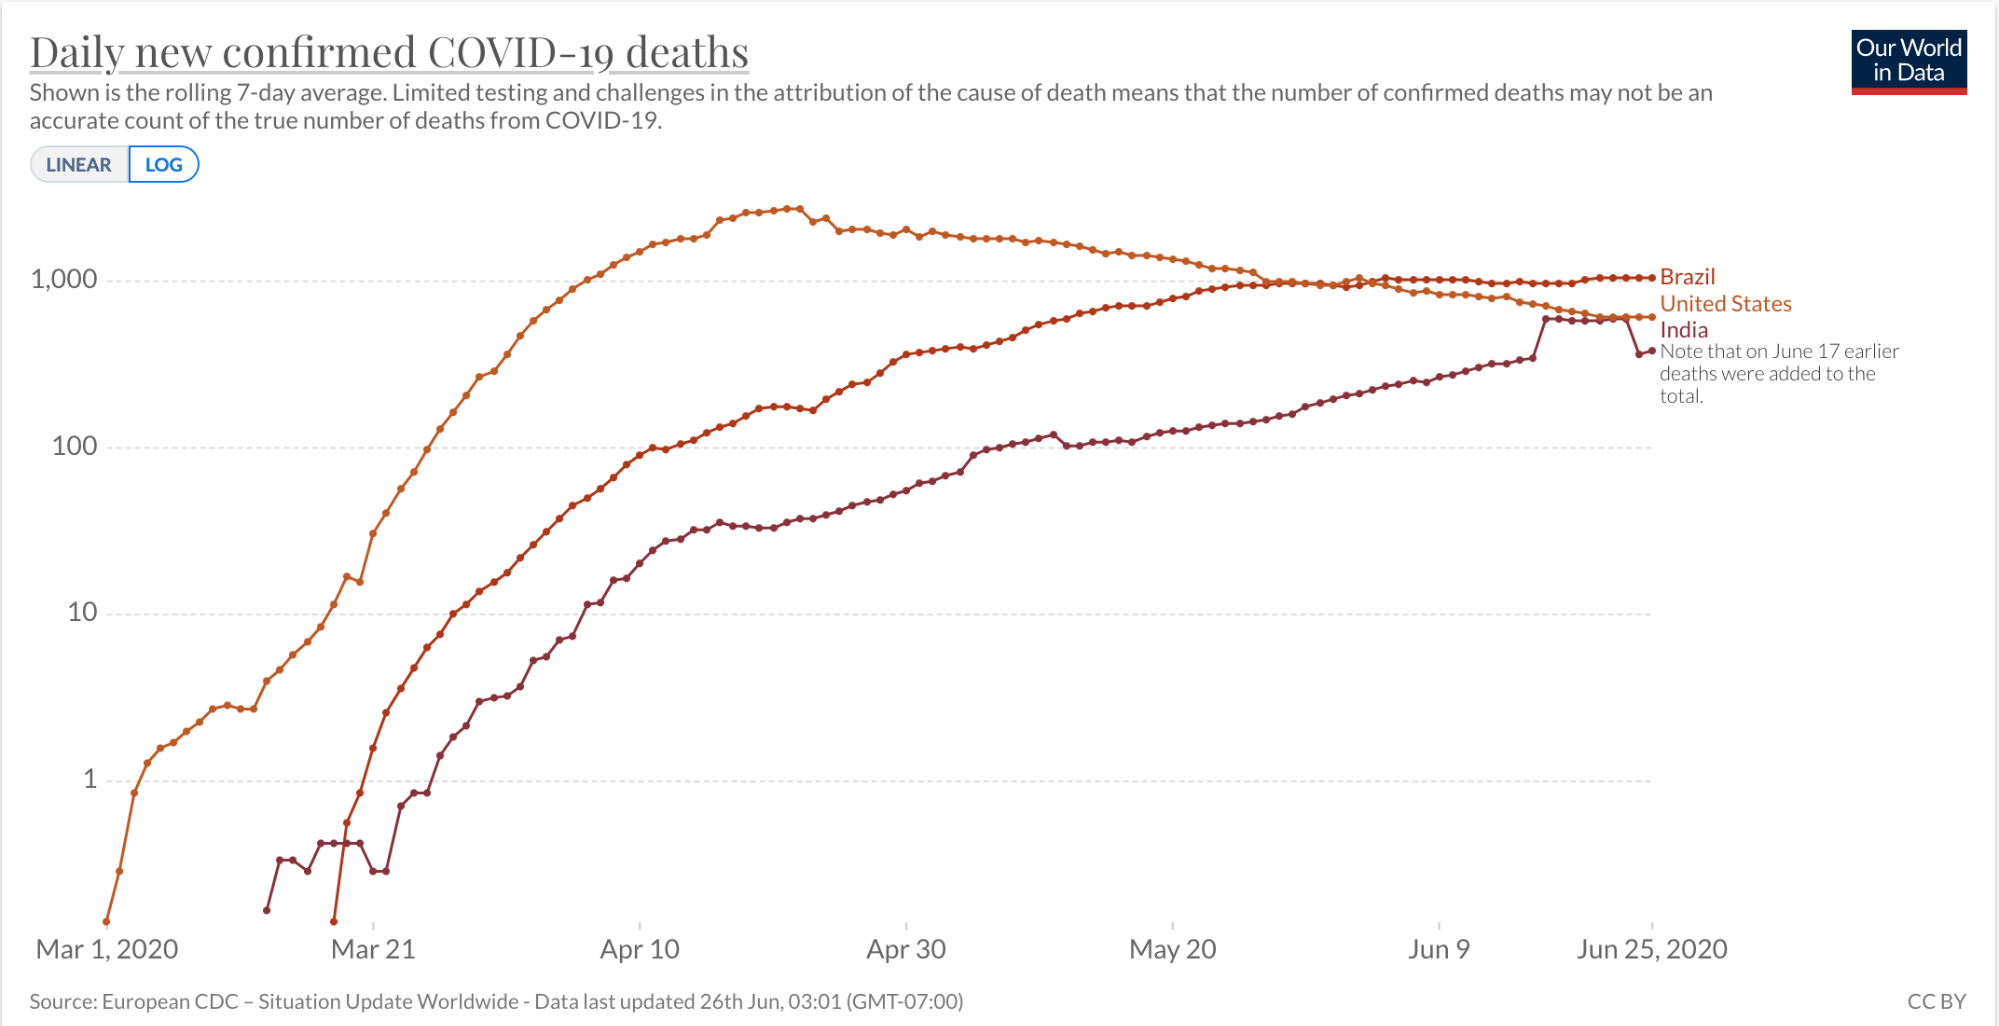 The rolling 7-day average of deaths for Brazil, United States, and India, as a logarithmic scale. Limited testing and challenges in the attribution of the cause of death means the number may not be an accurate count.